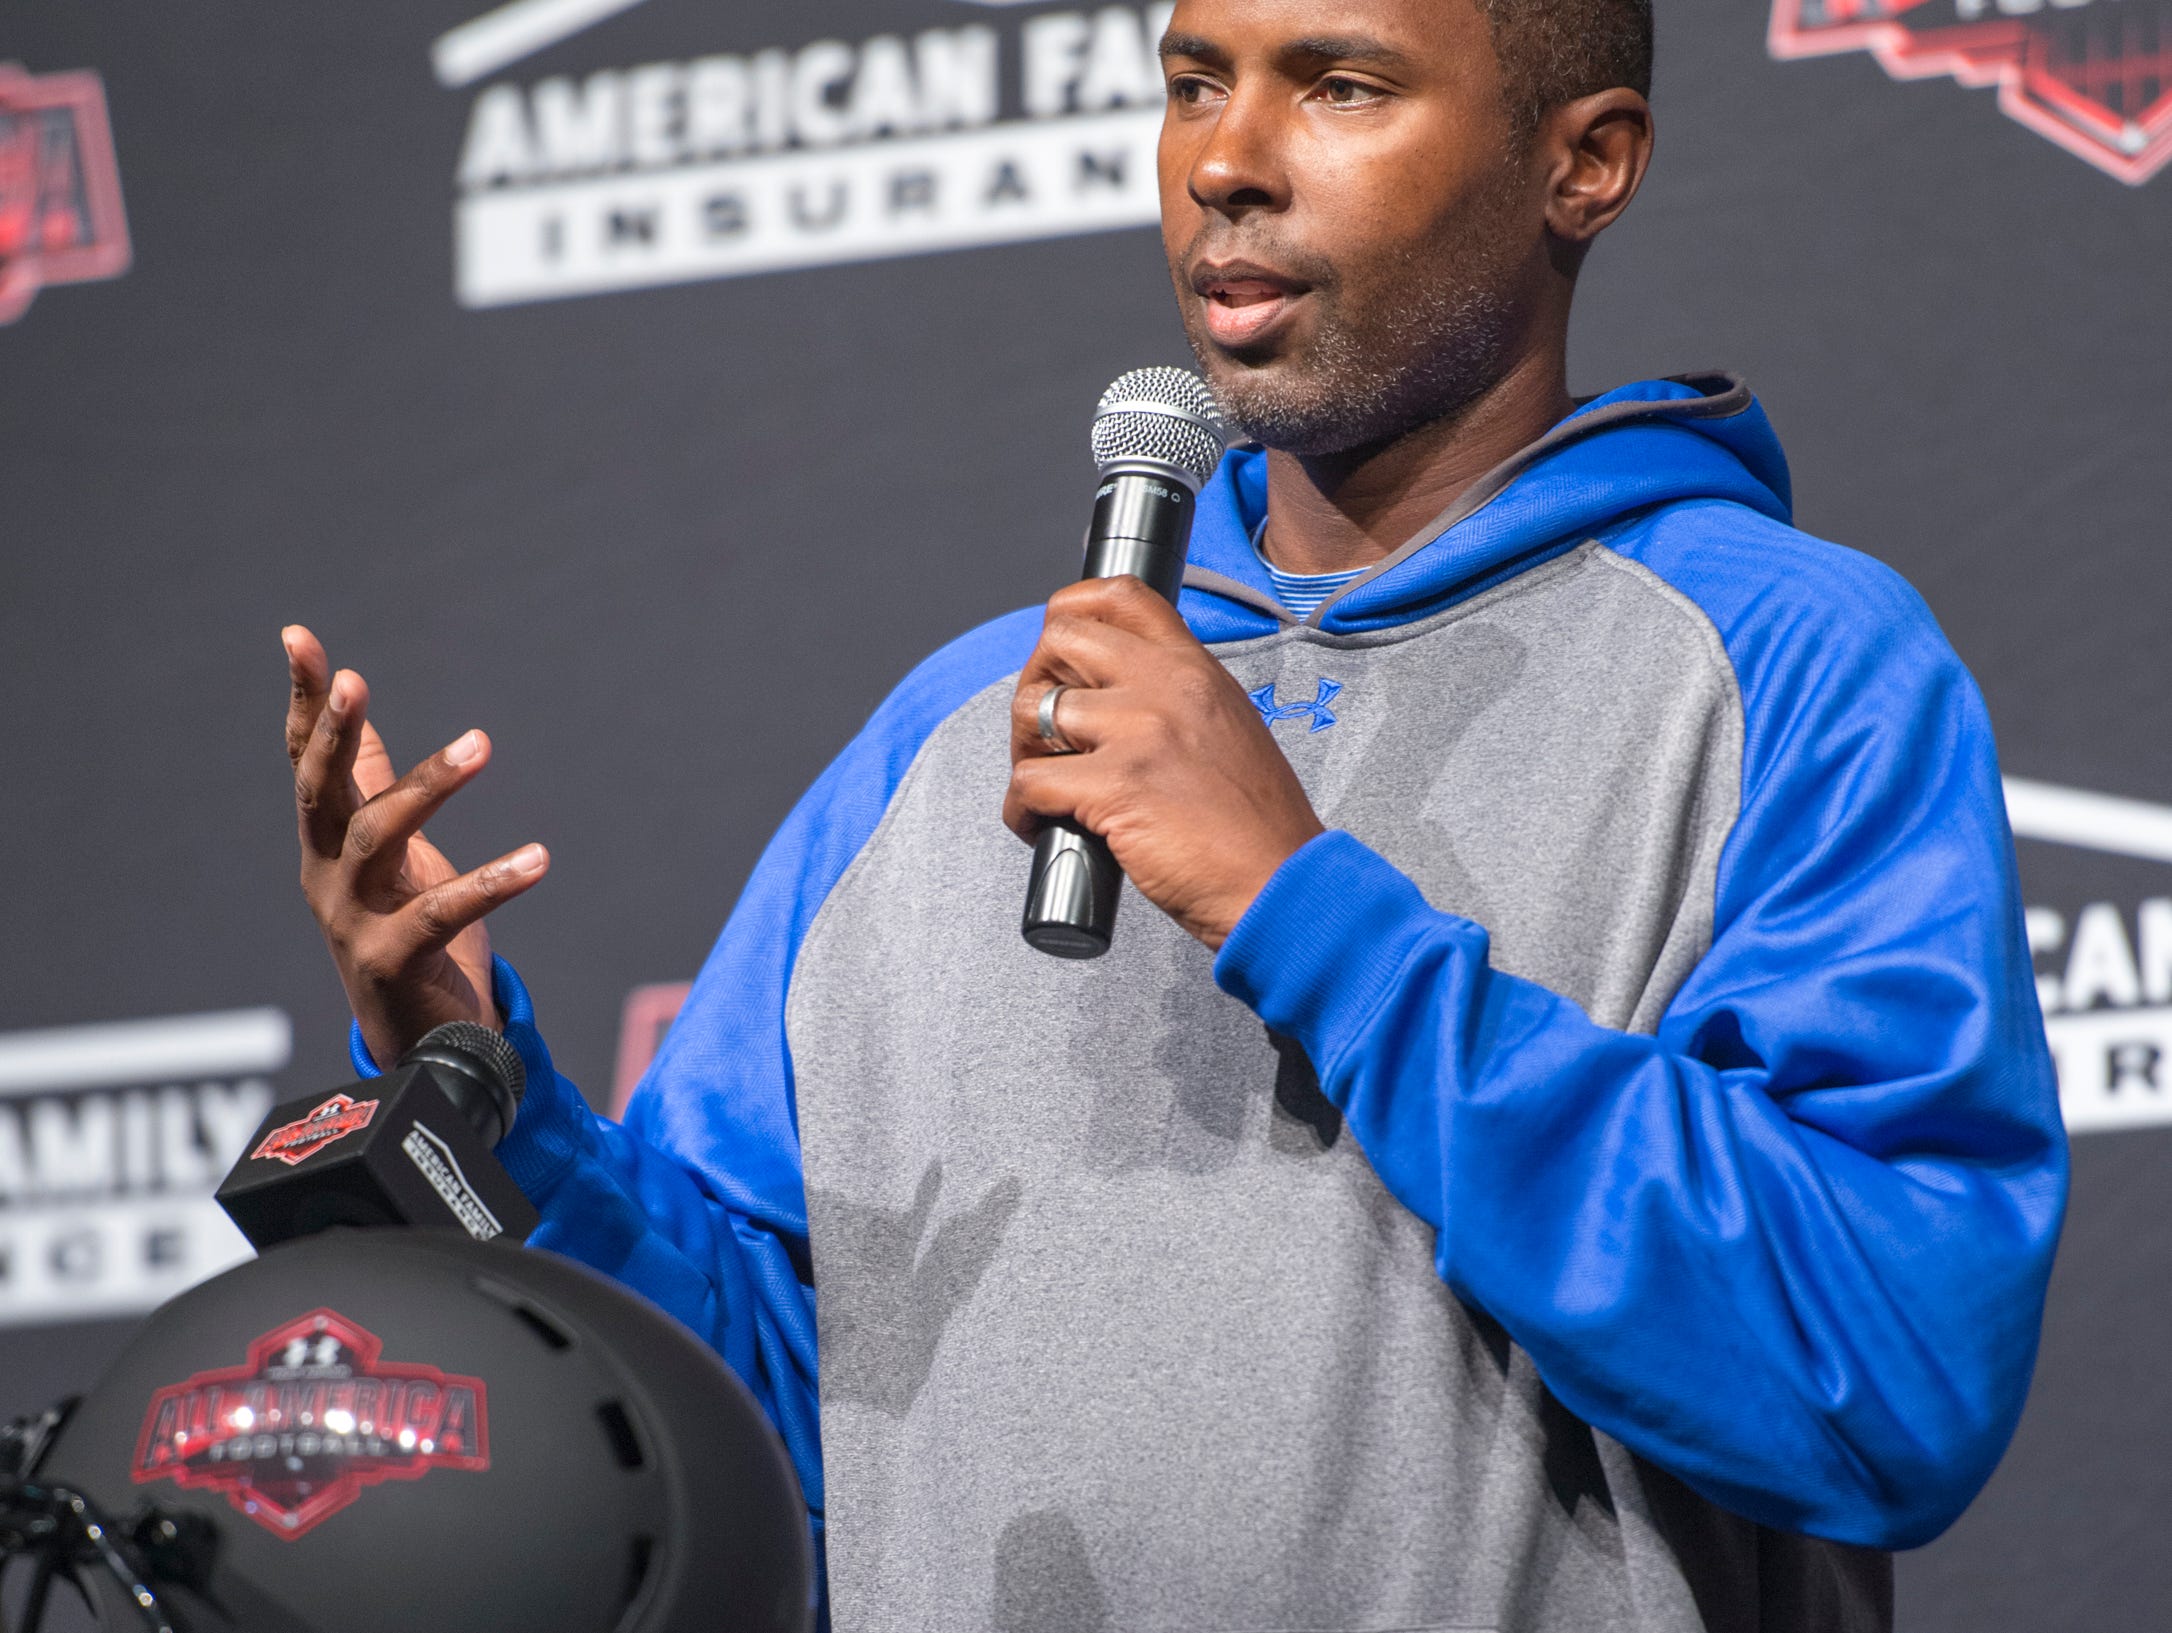 Coach Charlie Ward speaks during the event announcing that football player Alex Leatherwood has been selected for the annual Under Armour High School All-America Game at Booker T. Washington High School in Pensacola on Wednesday, October 12, 2016. The game featuring more than 90 of the nation's best senior high school football players will be played on January 1, 2017.